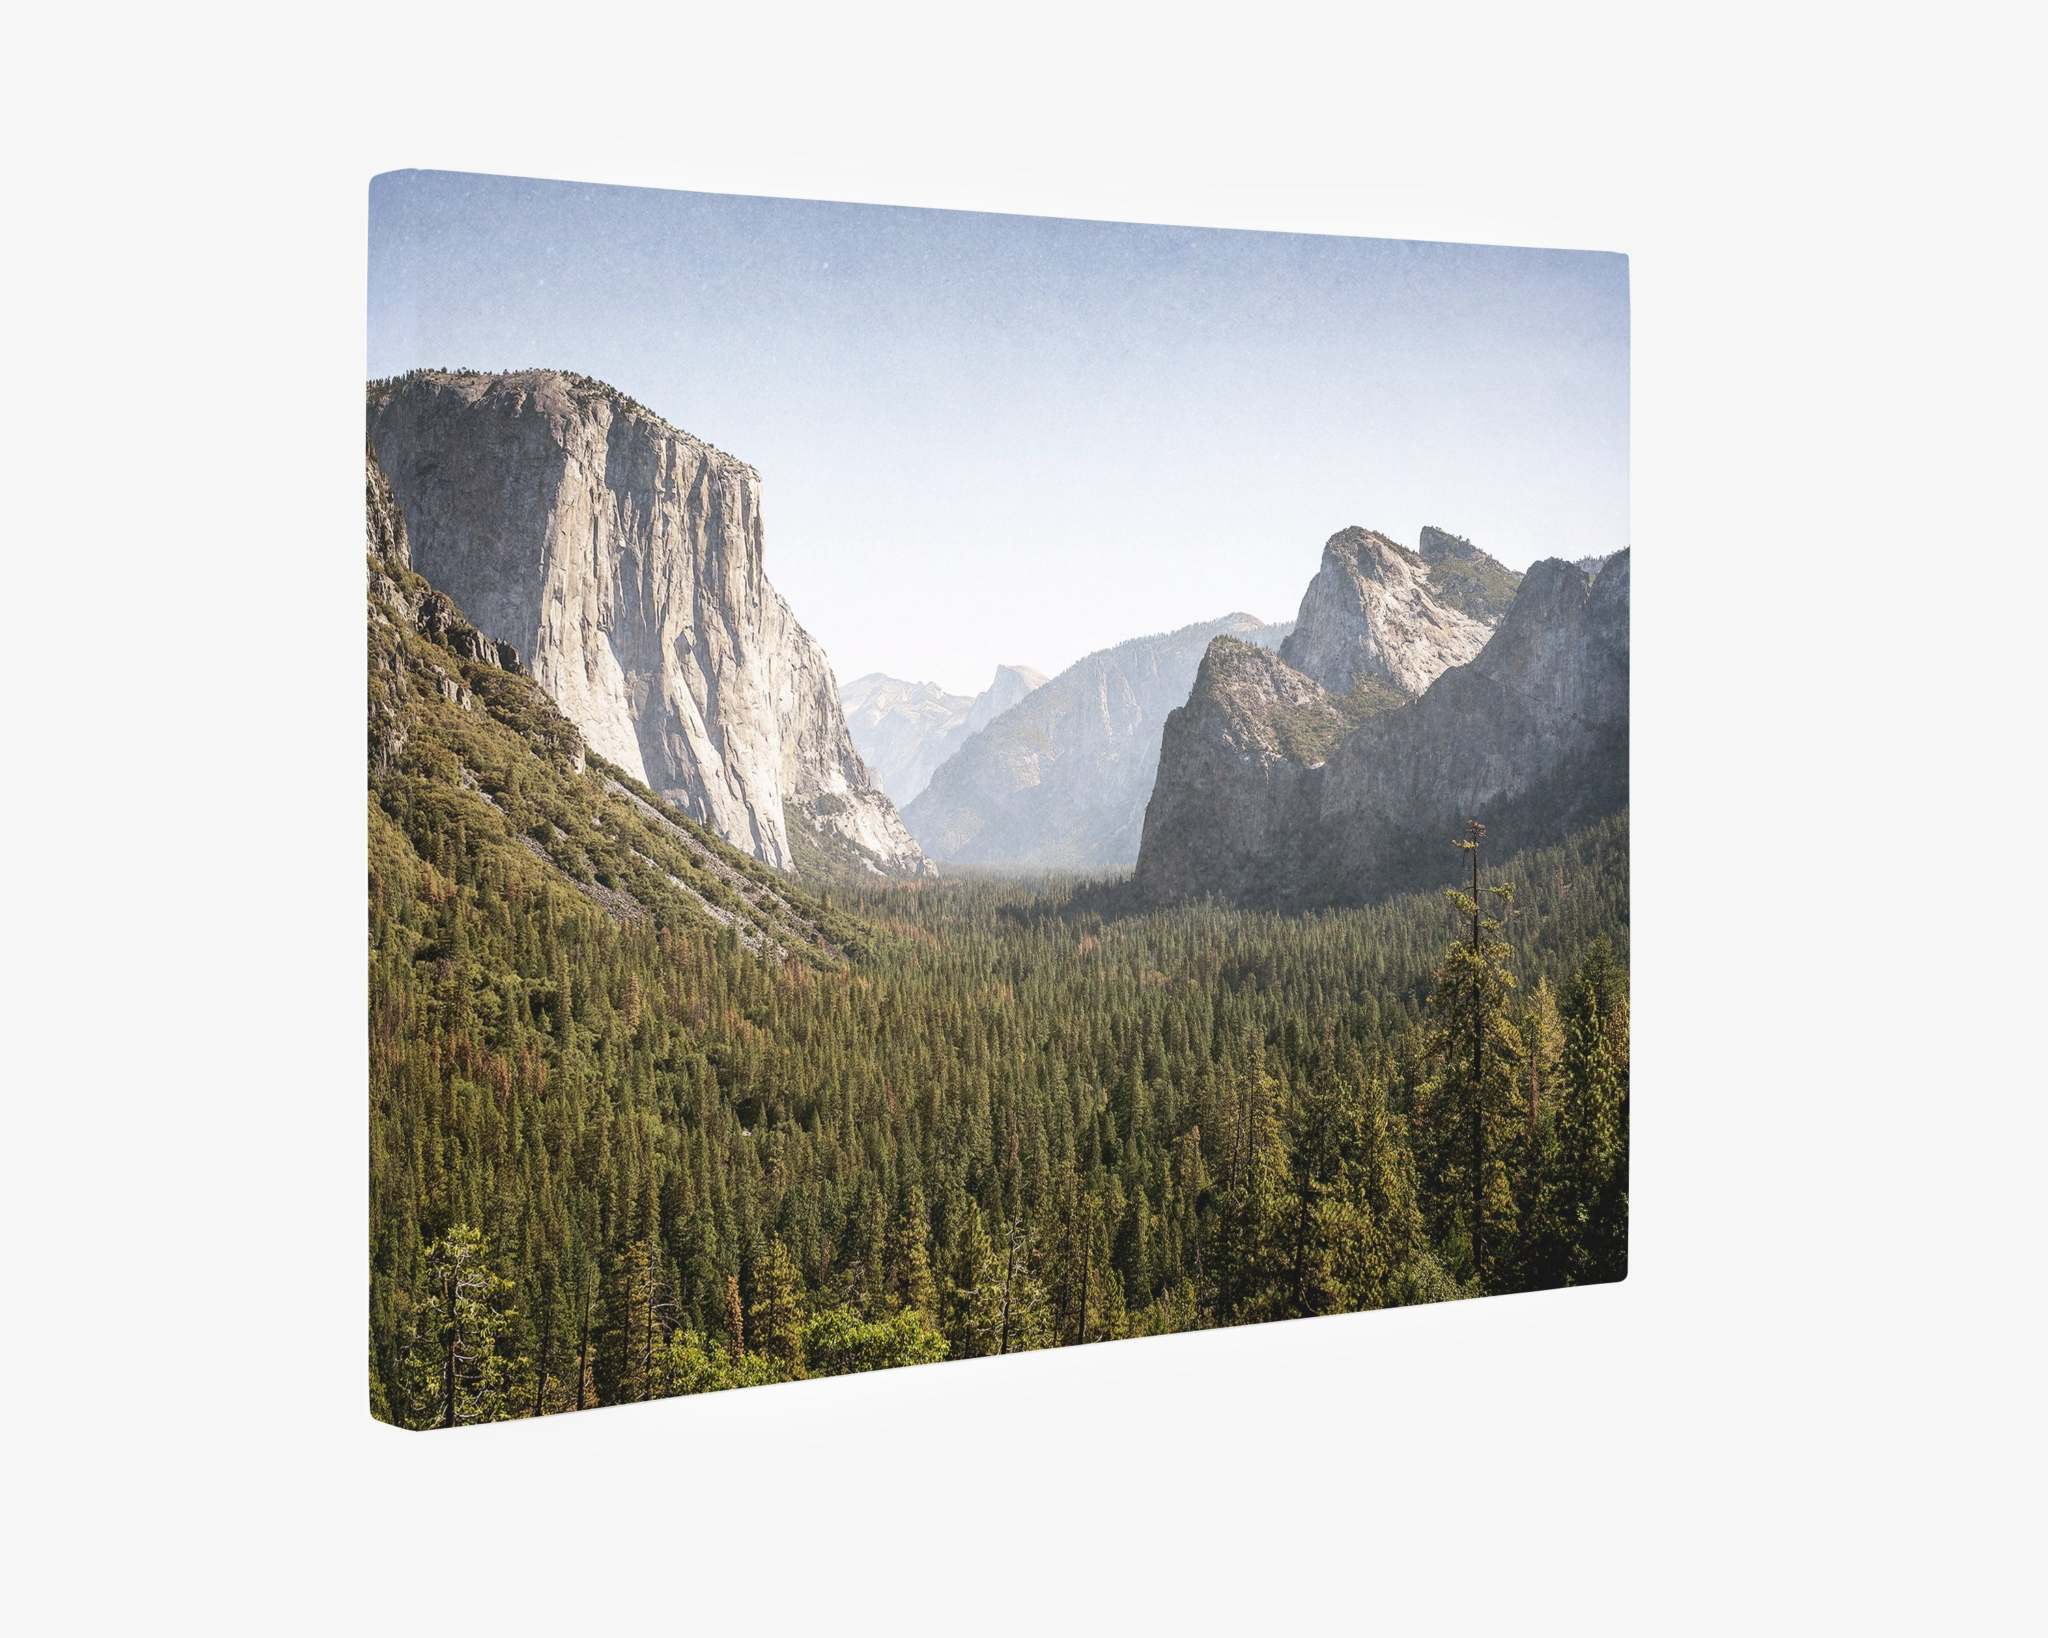 The Northern California Canvas Wall Art, &#39;Yosemite Valley&#39; by Offley Green showcases a breathtaking view of Yosemite Valley. Towering granite cliffs, including El Capitan on the left, rise above lush green pine forests, with a hazy blue sky overhead, capturing the majestic natural beauty of this iconic part of Yosemite National Park.